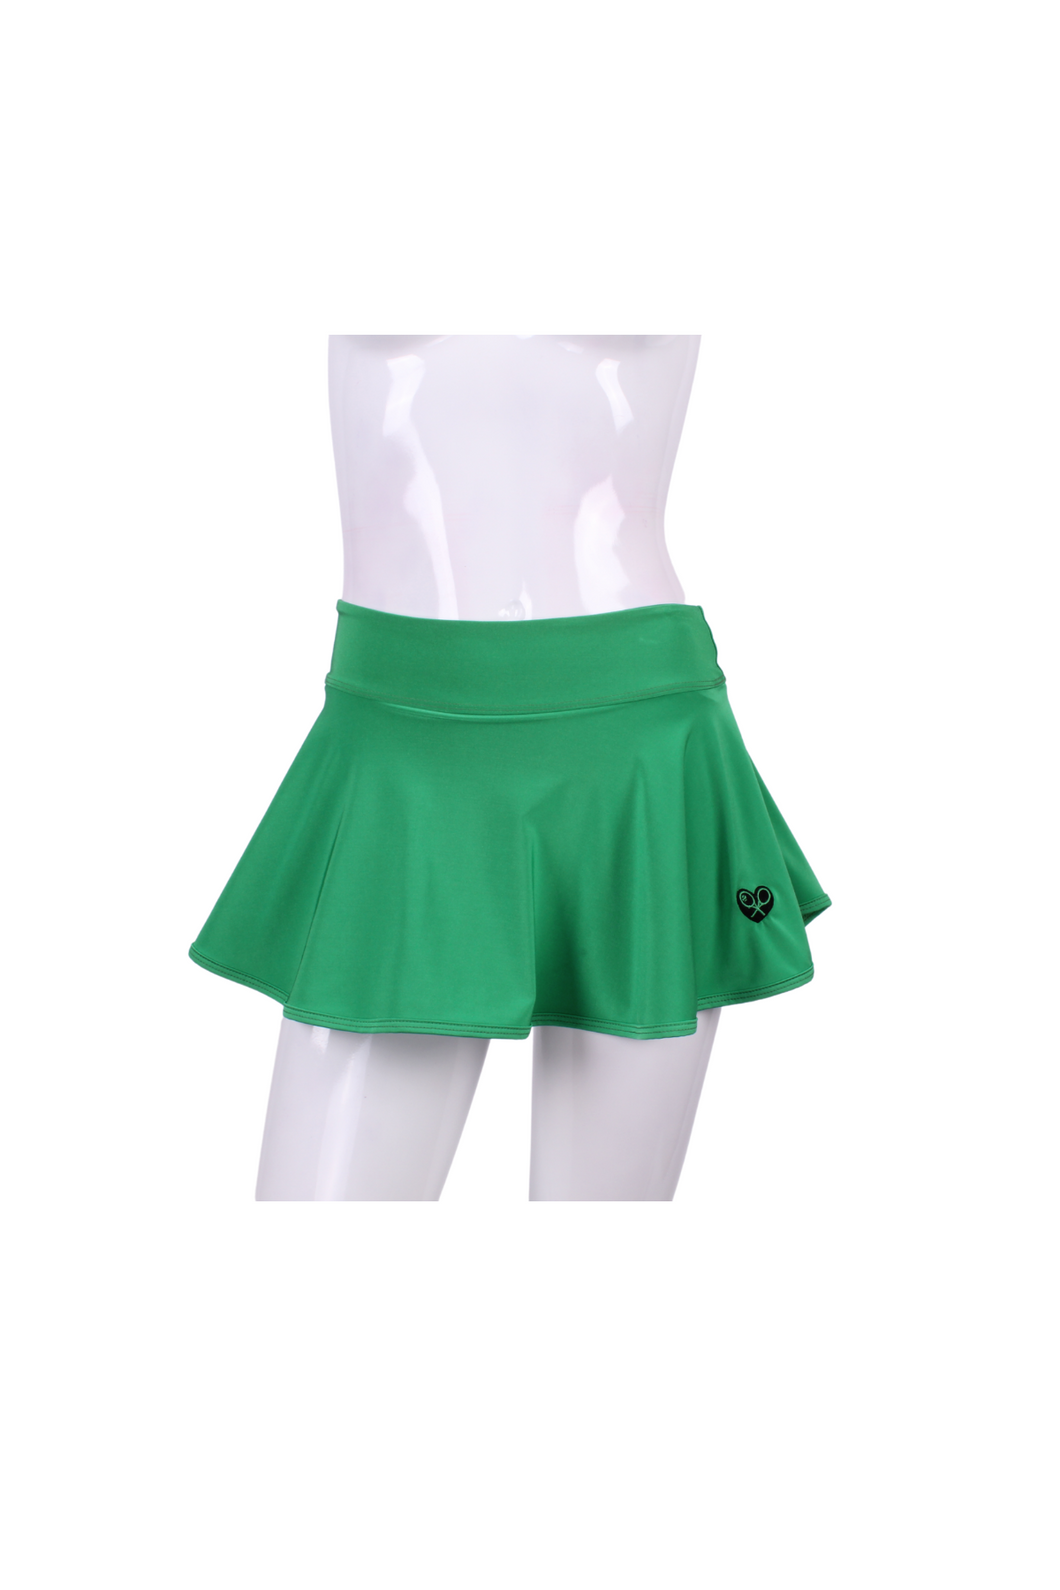 Green Limited LOVE “O” Skirt - I LOVE MY DOUBLES PARTNER!!!